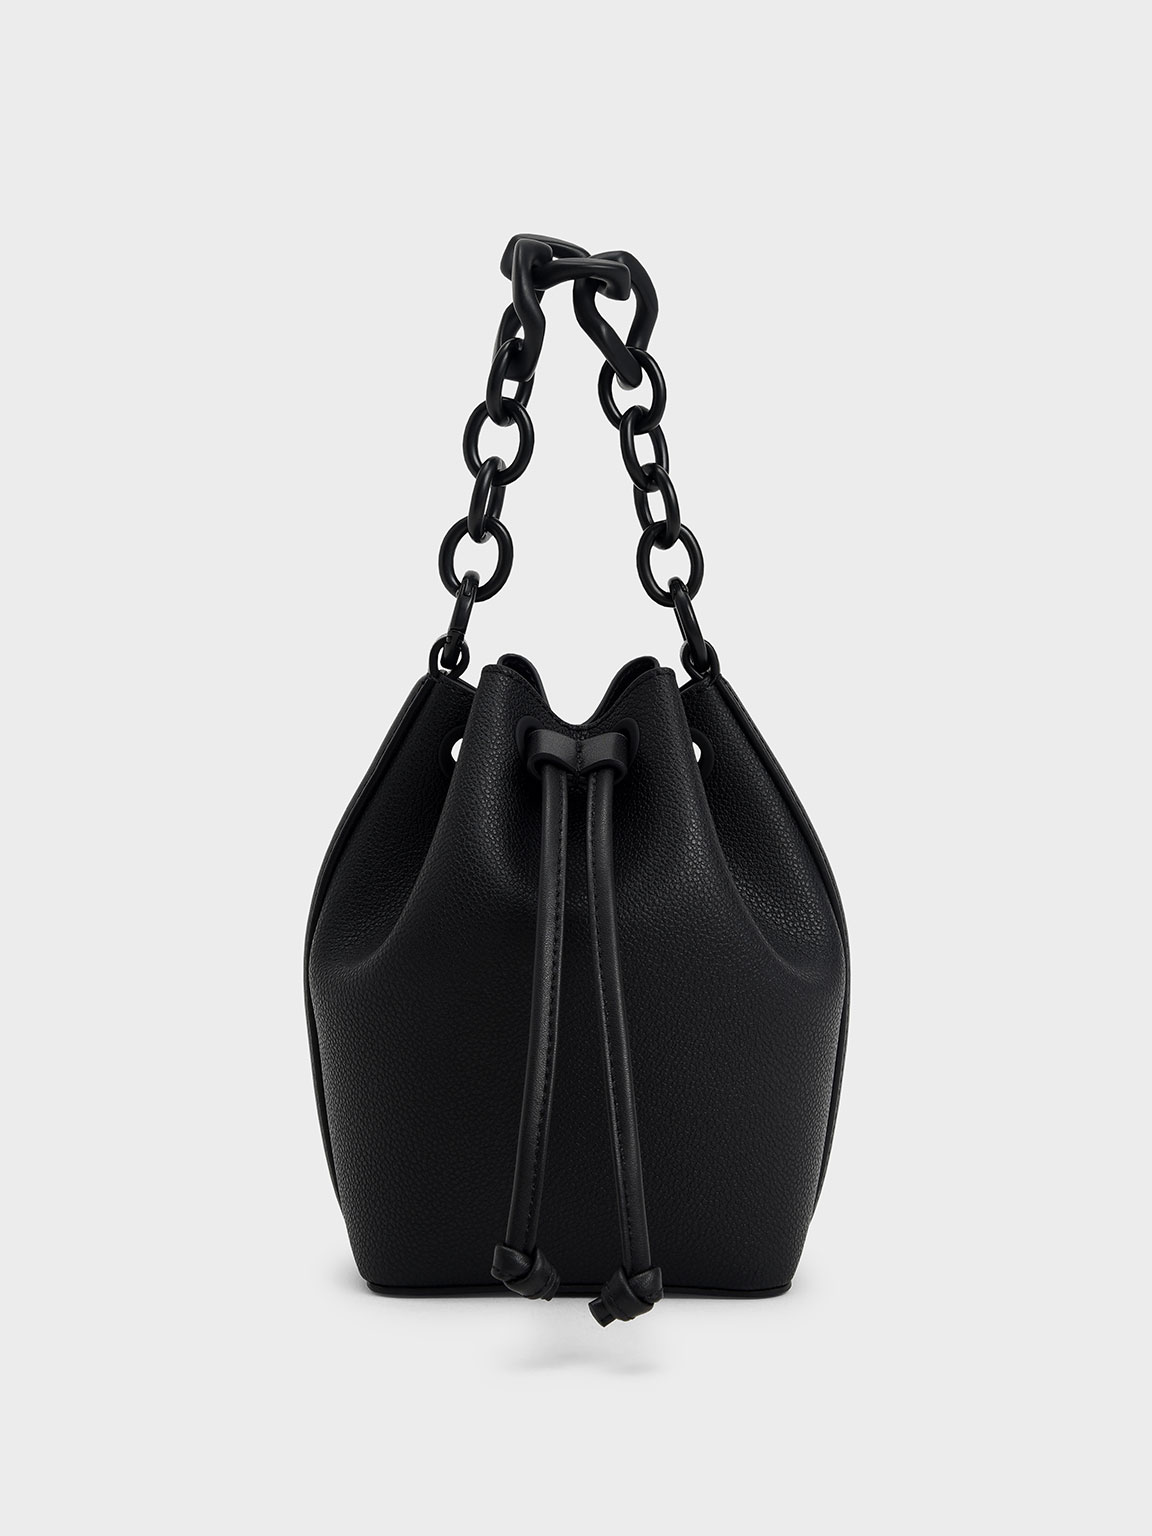 Generic Leather Drawstring Replacement Strap For Bucket Bag Black